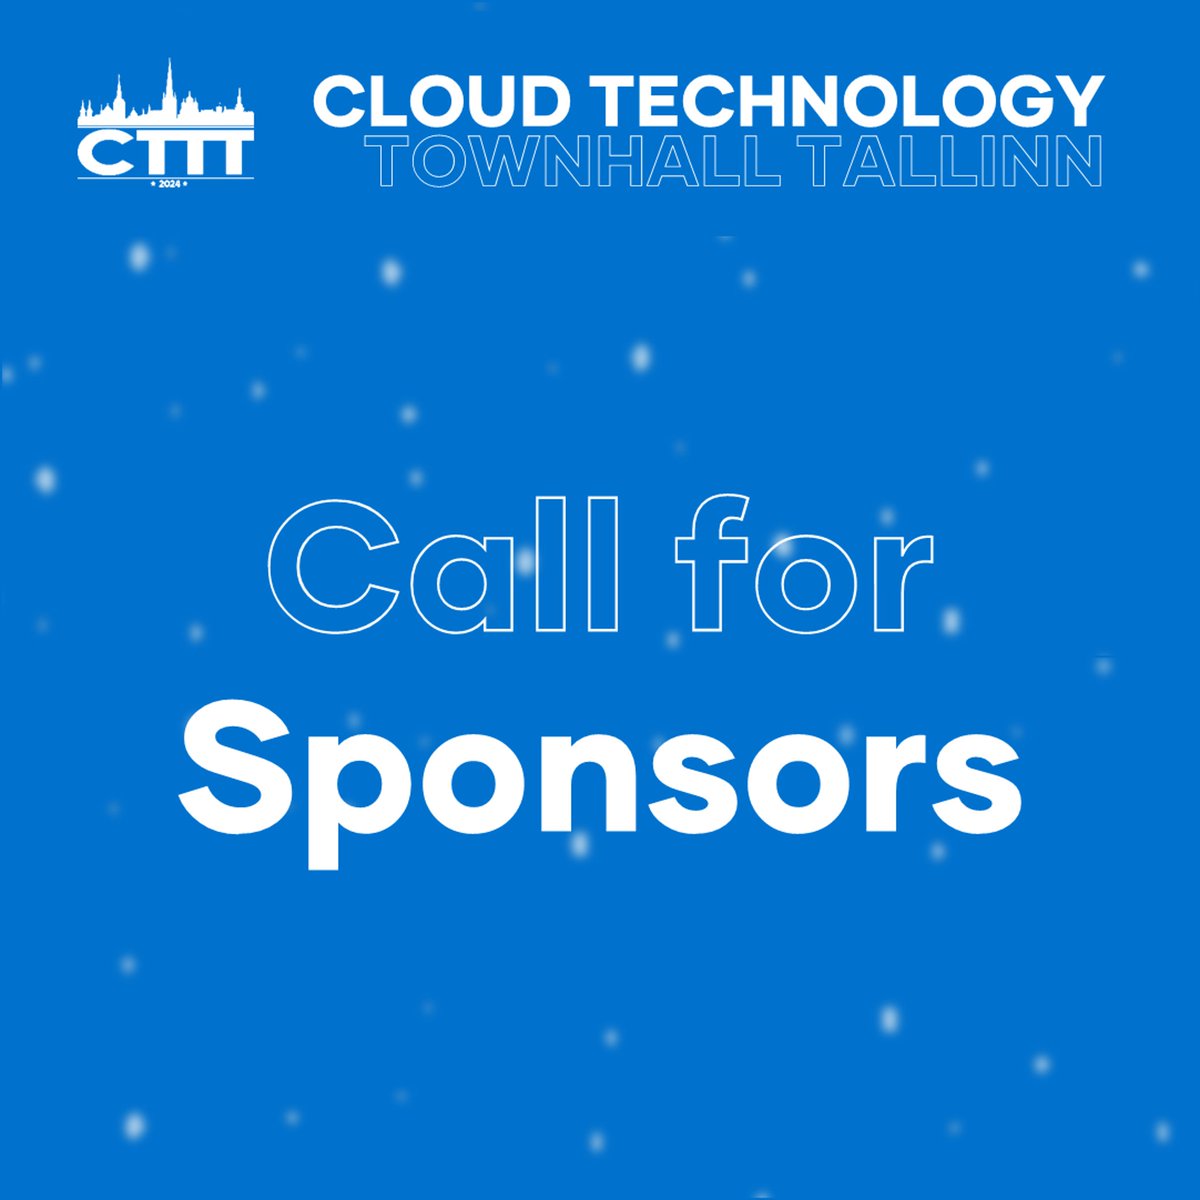 Our call for sponsors is open and we are looking for partners to make  #CTTT24 the best it can be!

Spread the word! 😉

Contact us: sponsors@cloudtechtallinn.com

#BusinessApplications #Automation #Data #Reporting #M365 #Security #Community #Business #VisitTallinn #Tallinn